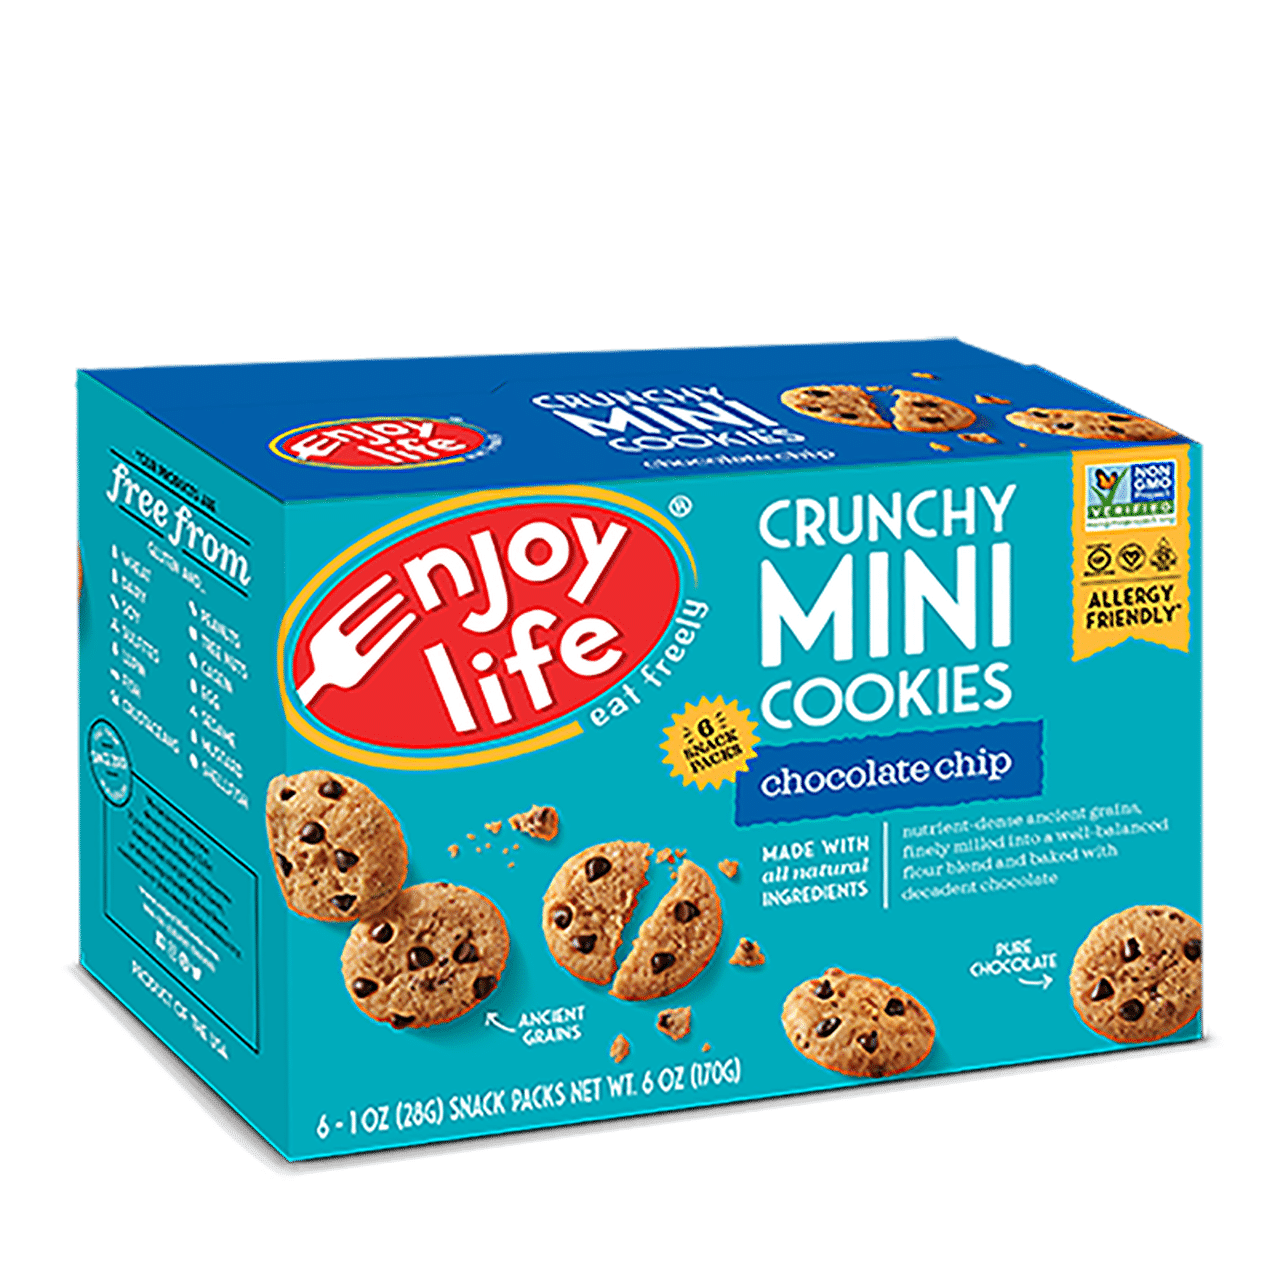 Enjoy LIfe Crunchy Mini Chocolate Chip Cookies Package